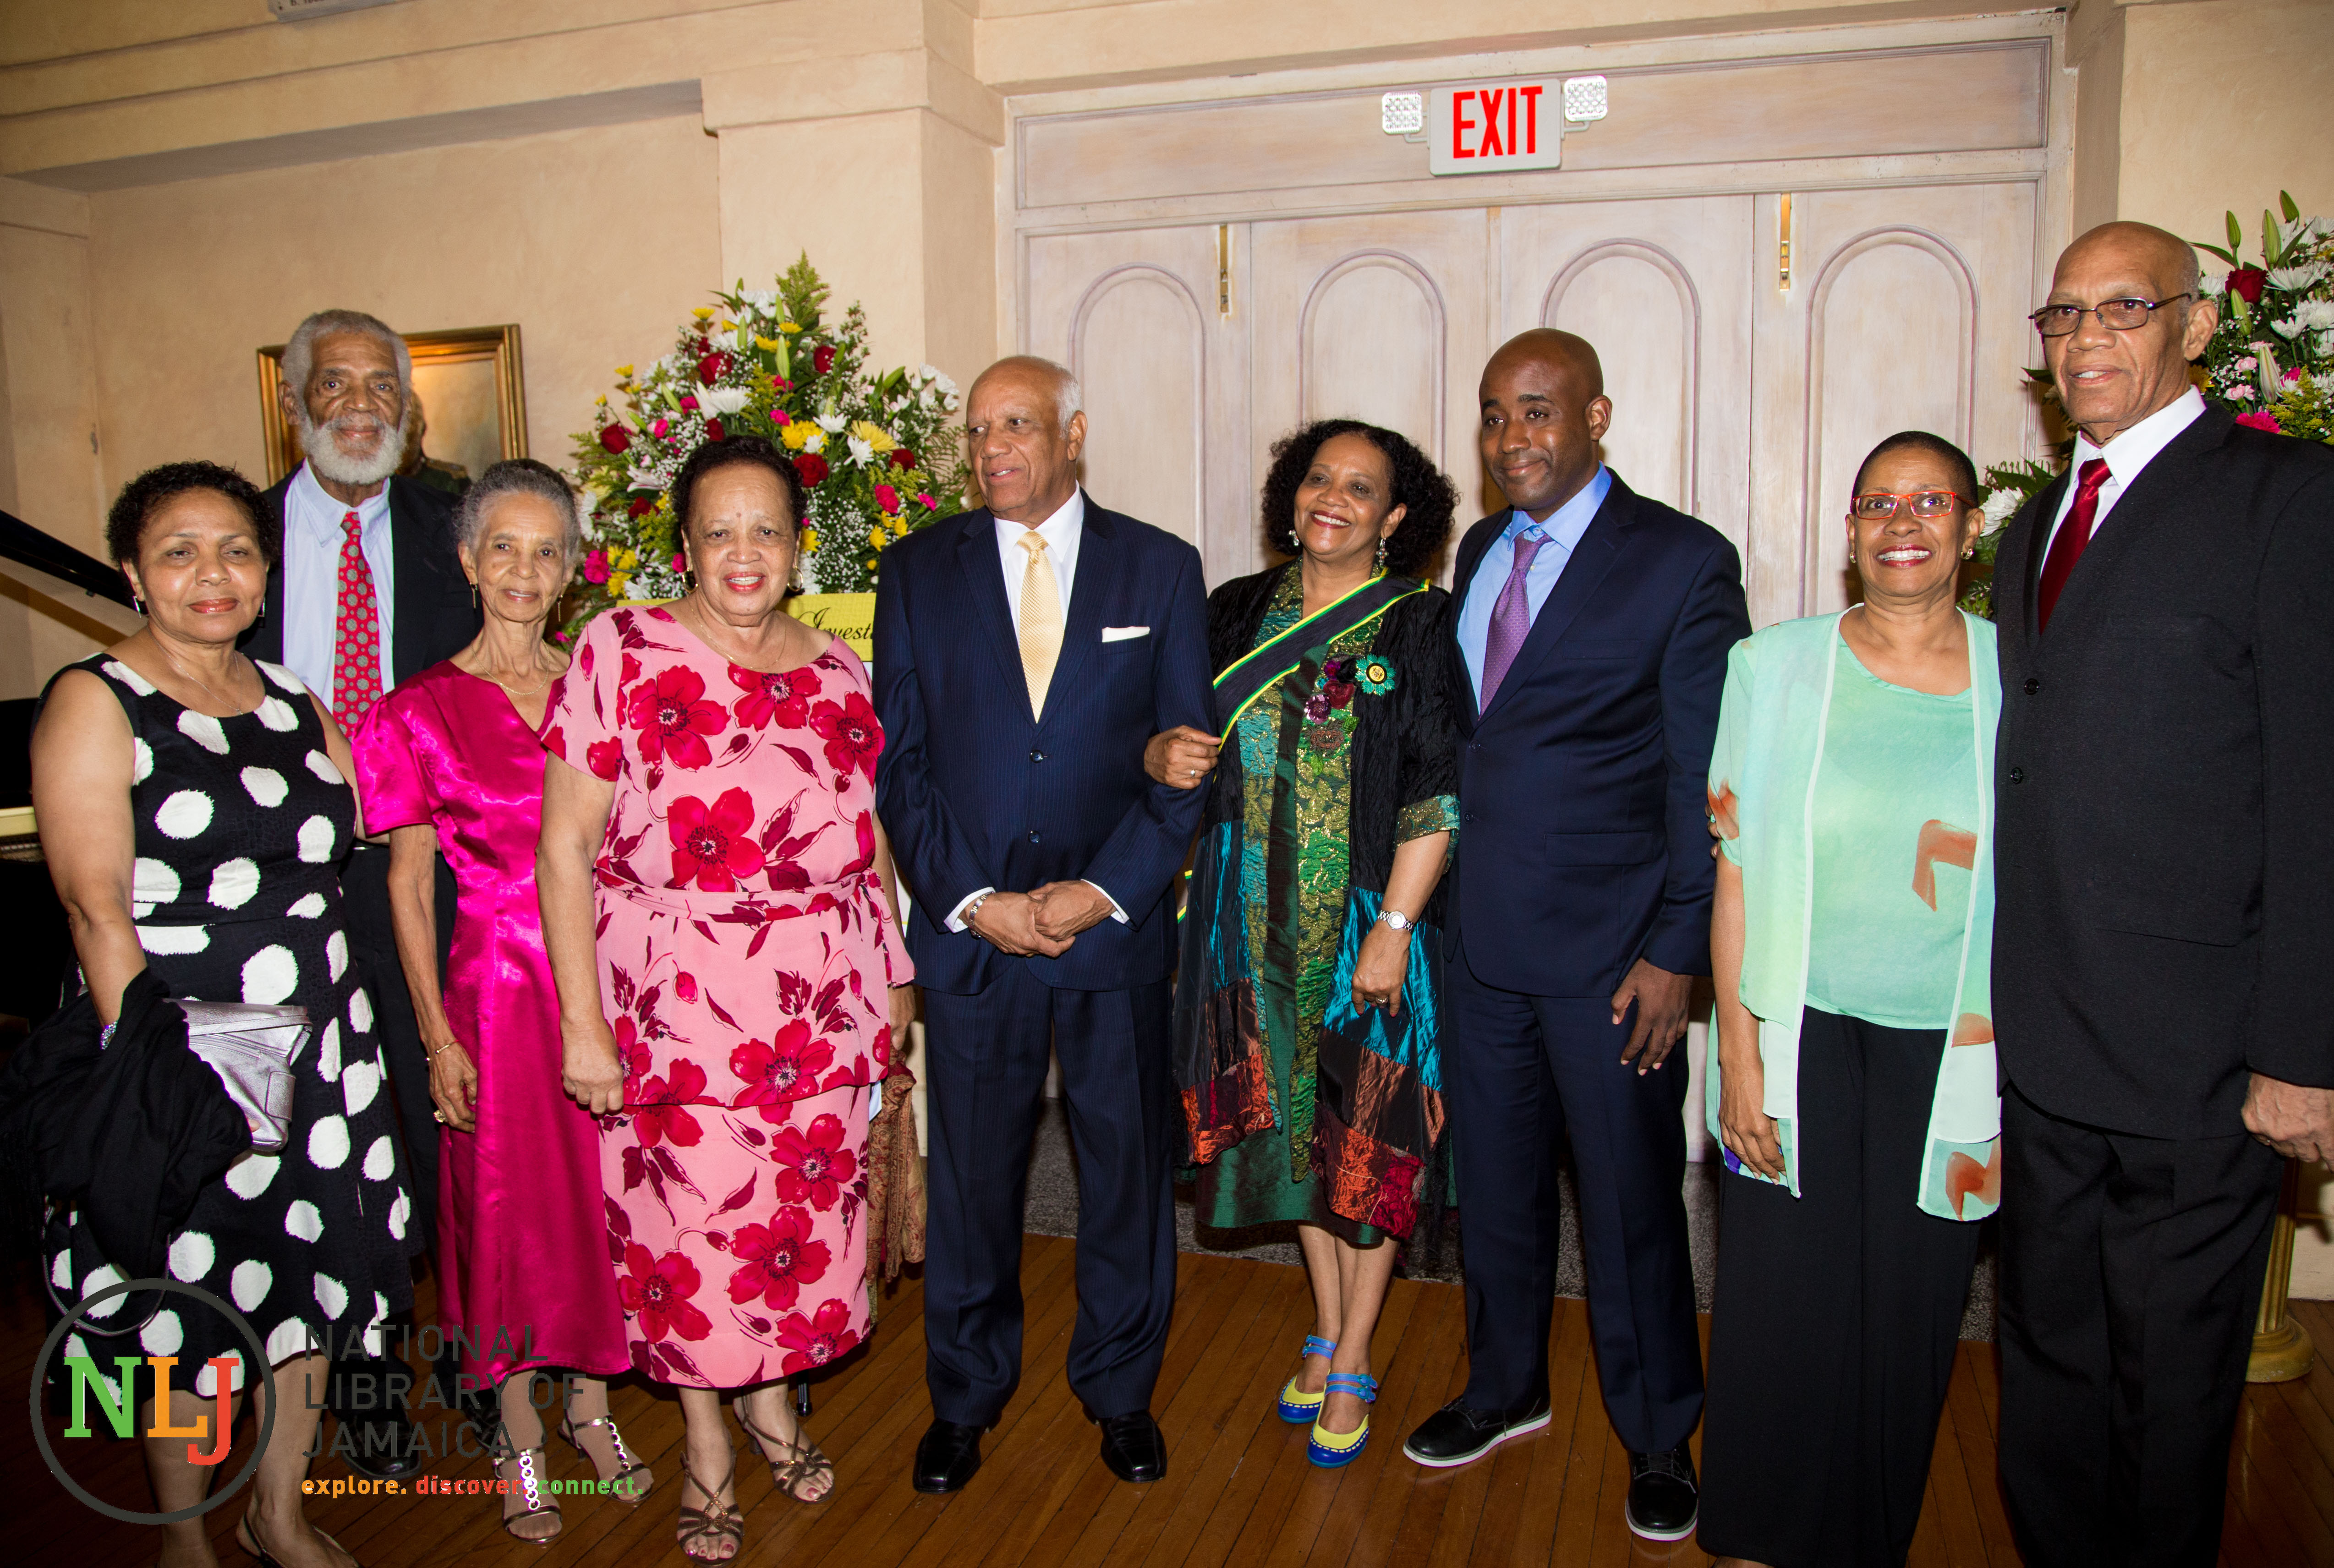 Members of the Goodison family join in celebrating the Investiture of Lorna Goodison as the Poet Laureate of Jamaica 2017-2020